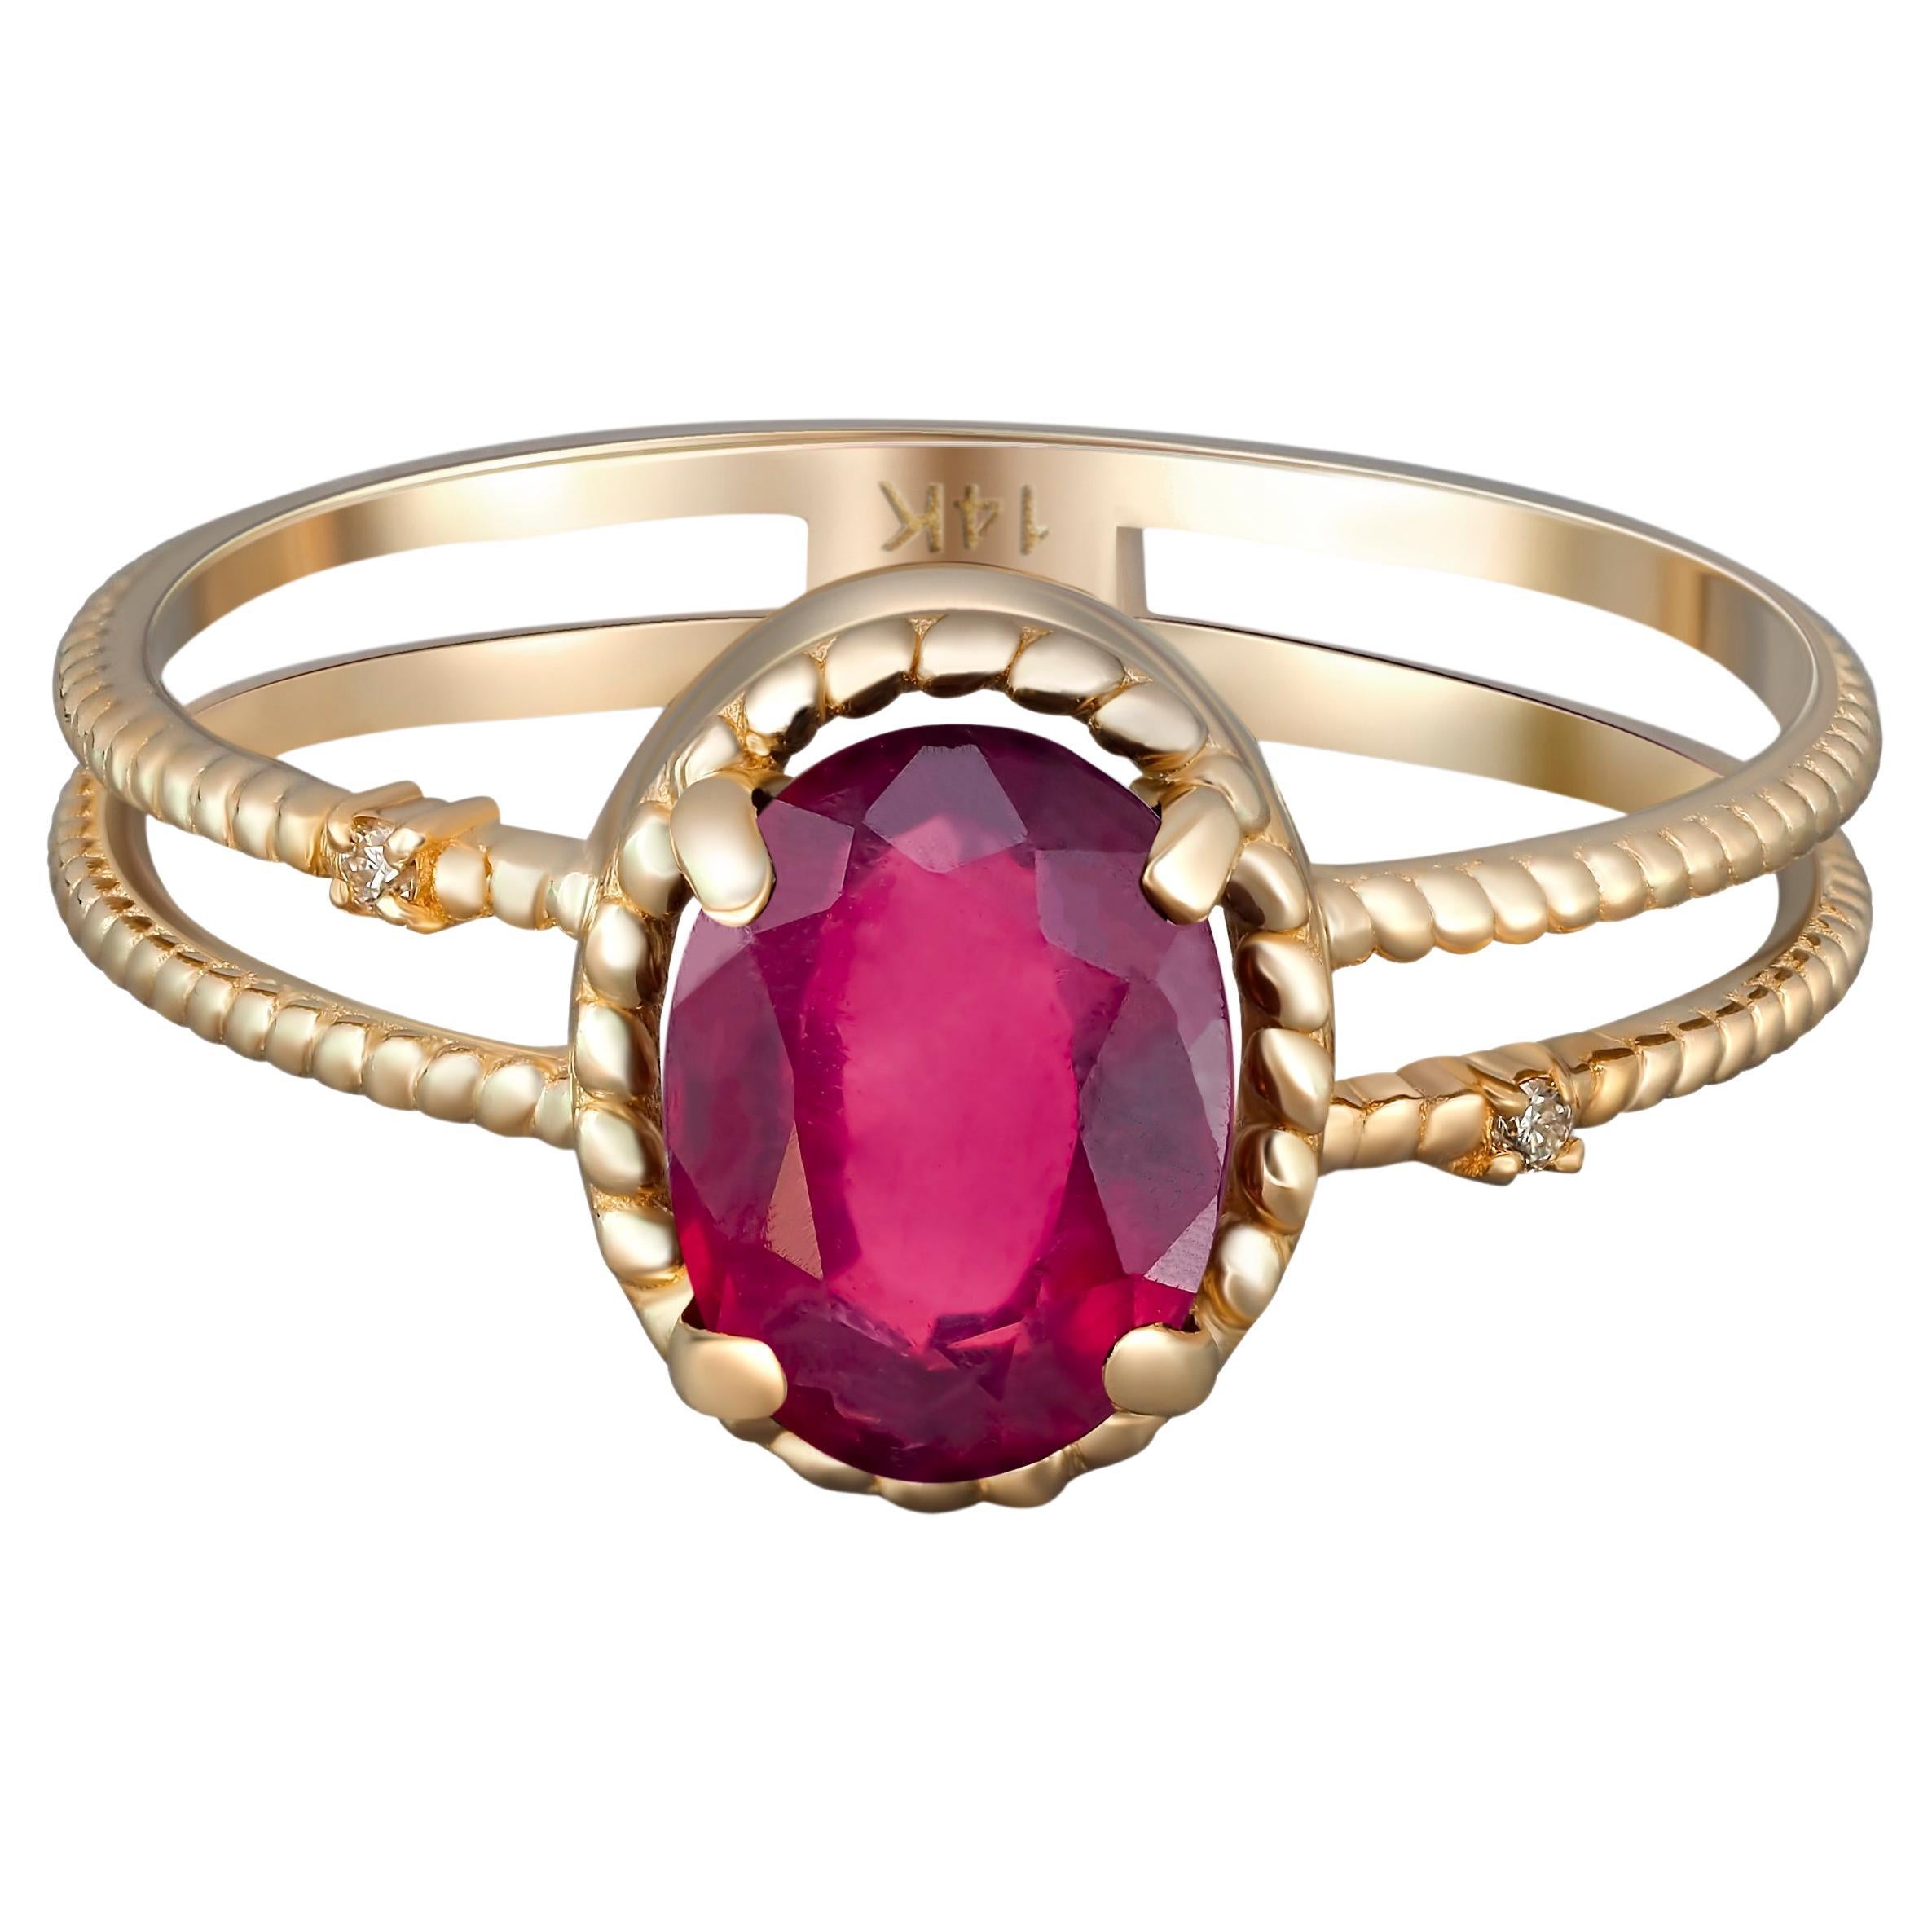 Oval Ruby Ring, 14k Gold Ring with Ruby, Minimalist Ruby Ring For Sale